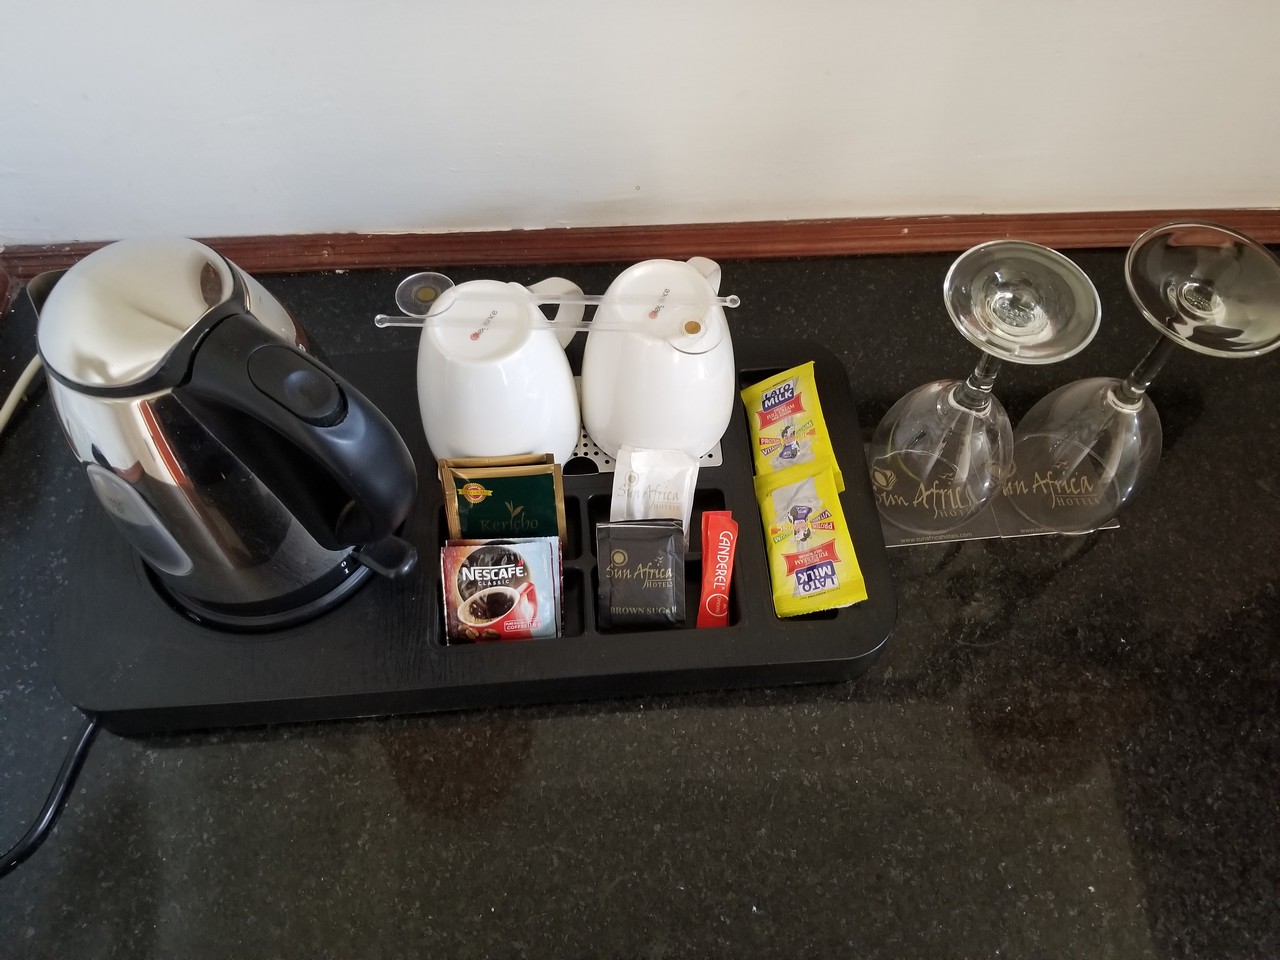 a coffee pot and condiments on a tray